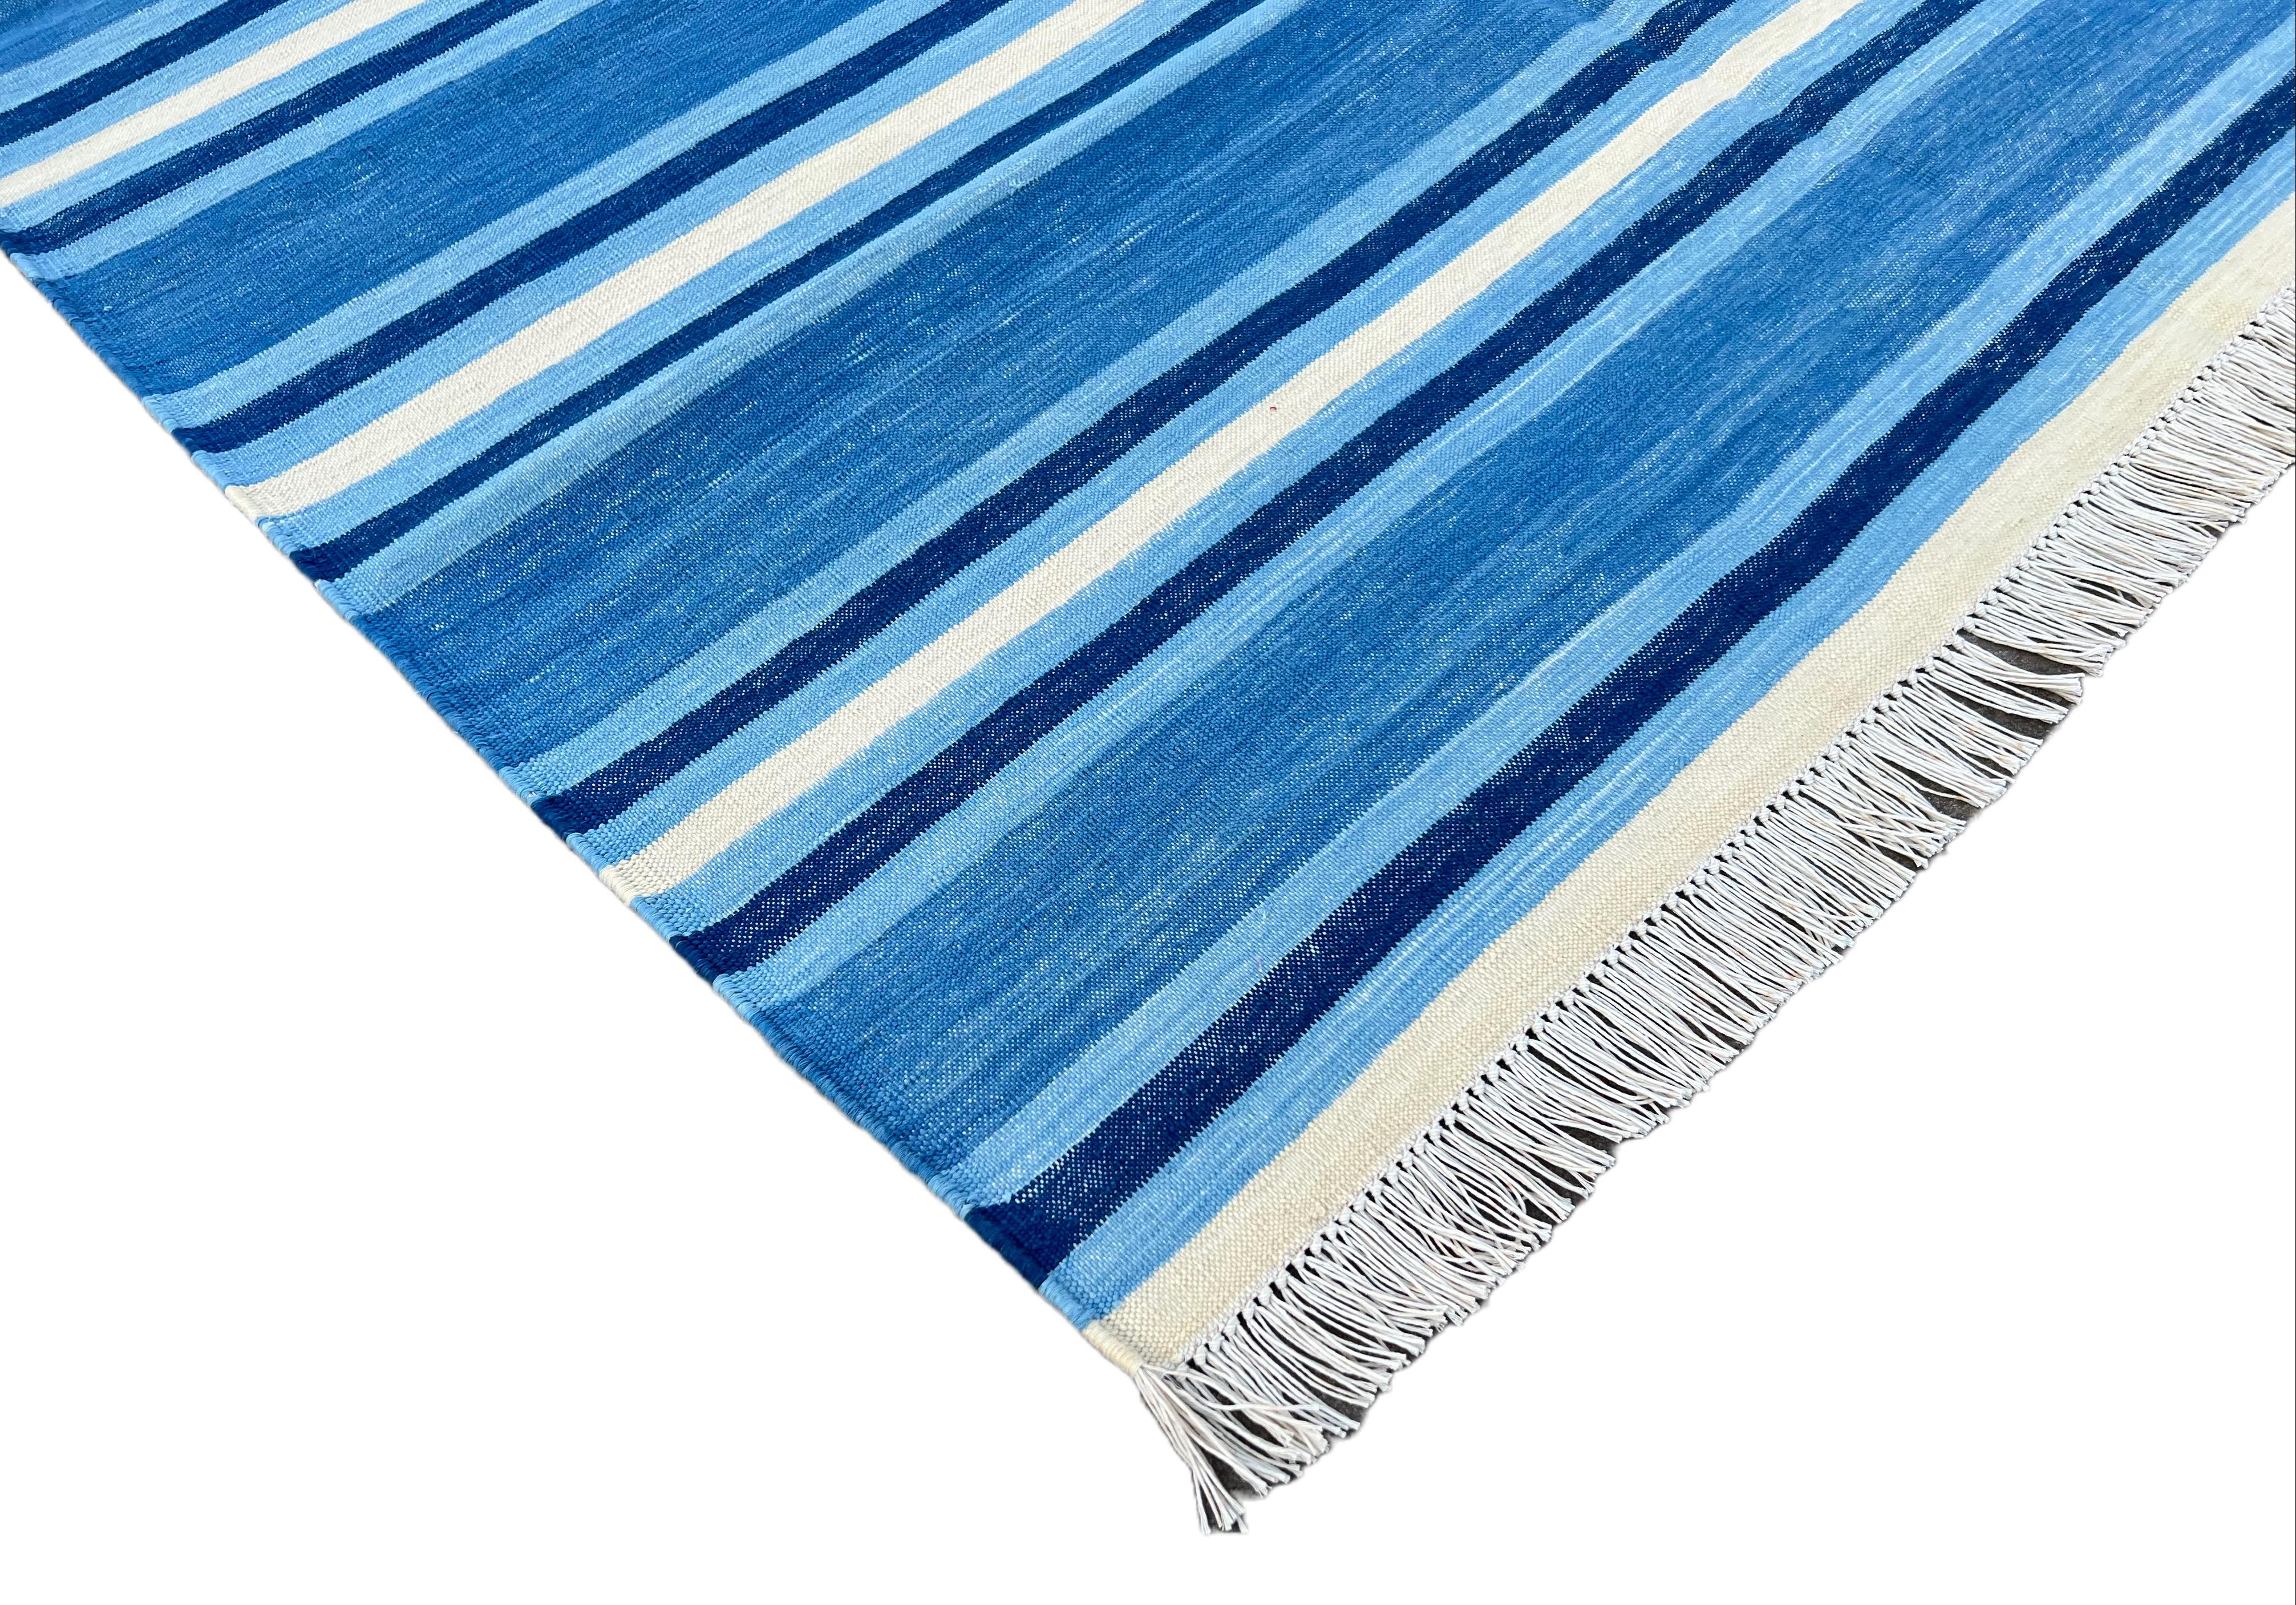 Cotton Vegetable Dyed Blue and White Striped Indian Dhurrie Rug-4'x6' 

These special flat-weave dhurries are hand-woven with 15 ply 100% cotton yarn. Due to the special manufacturing techniques used to create our rugs, the size and color of each